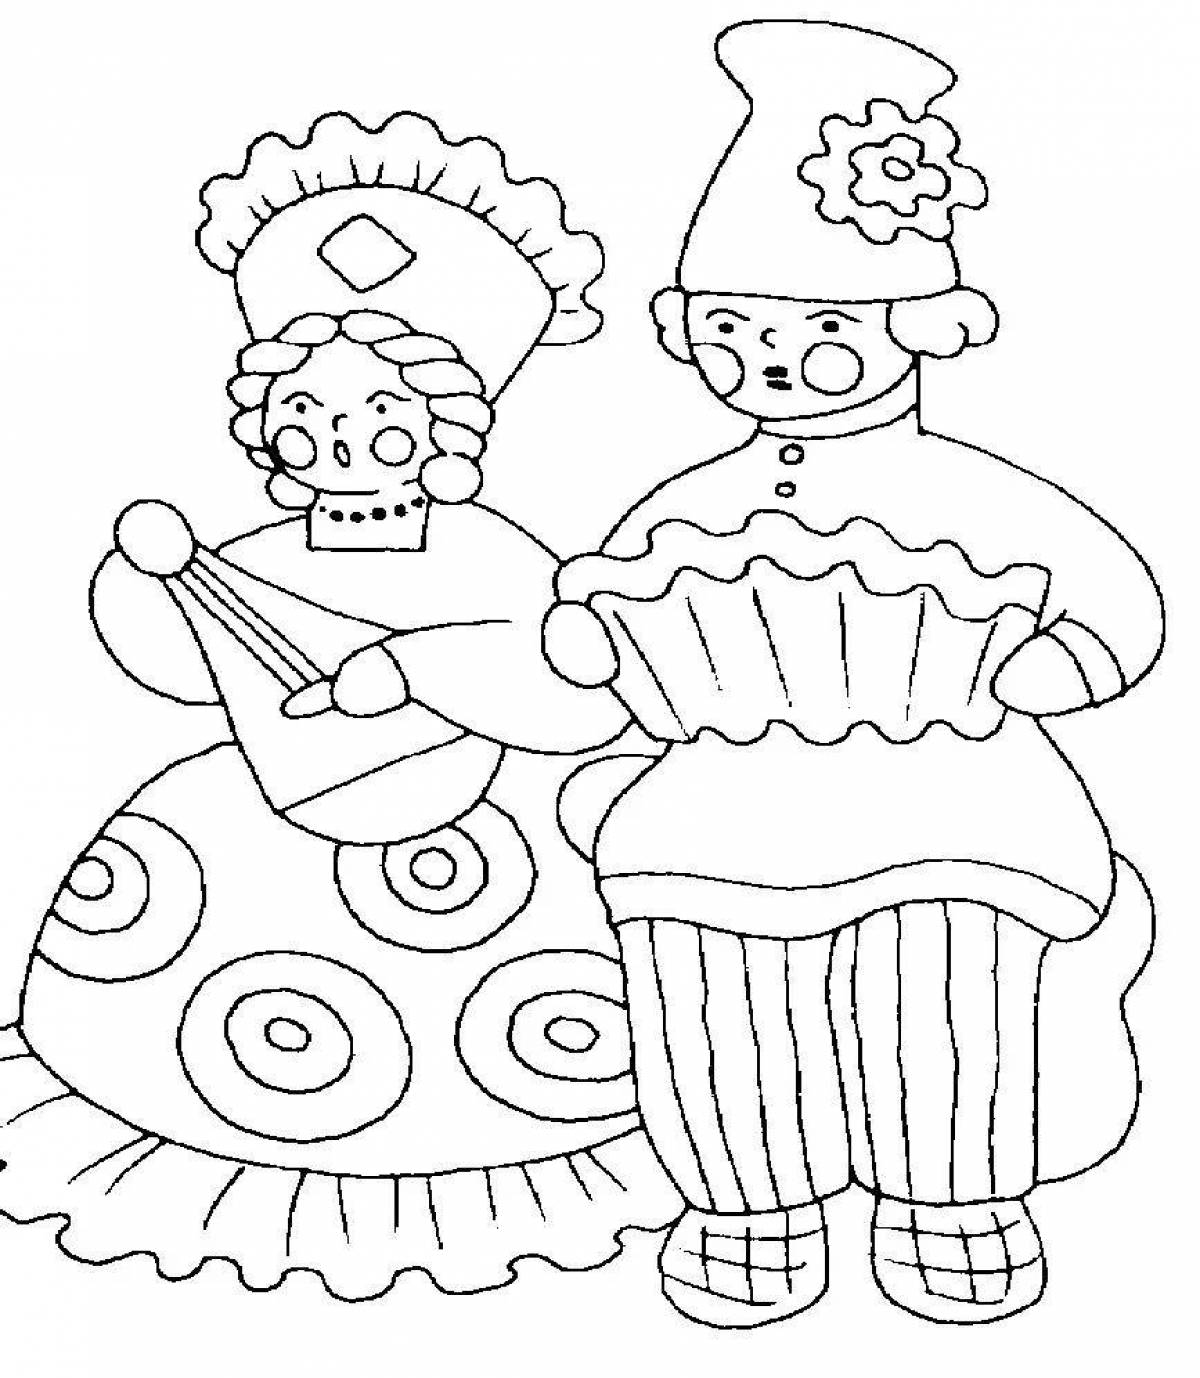 Coloring book cute folk toys for 3-4 year olds